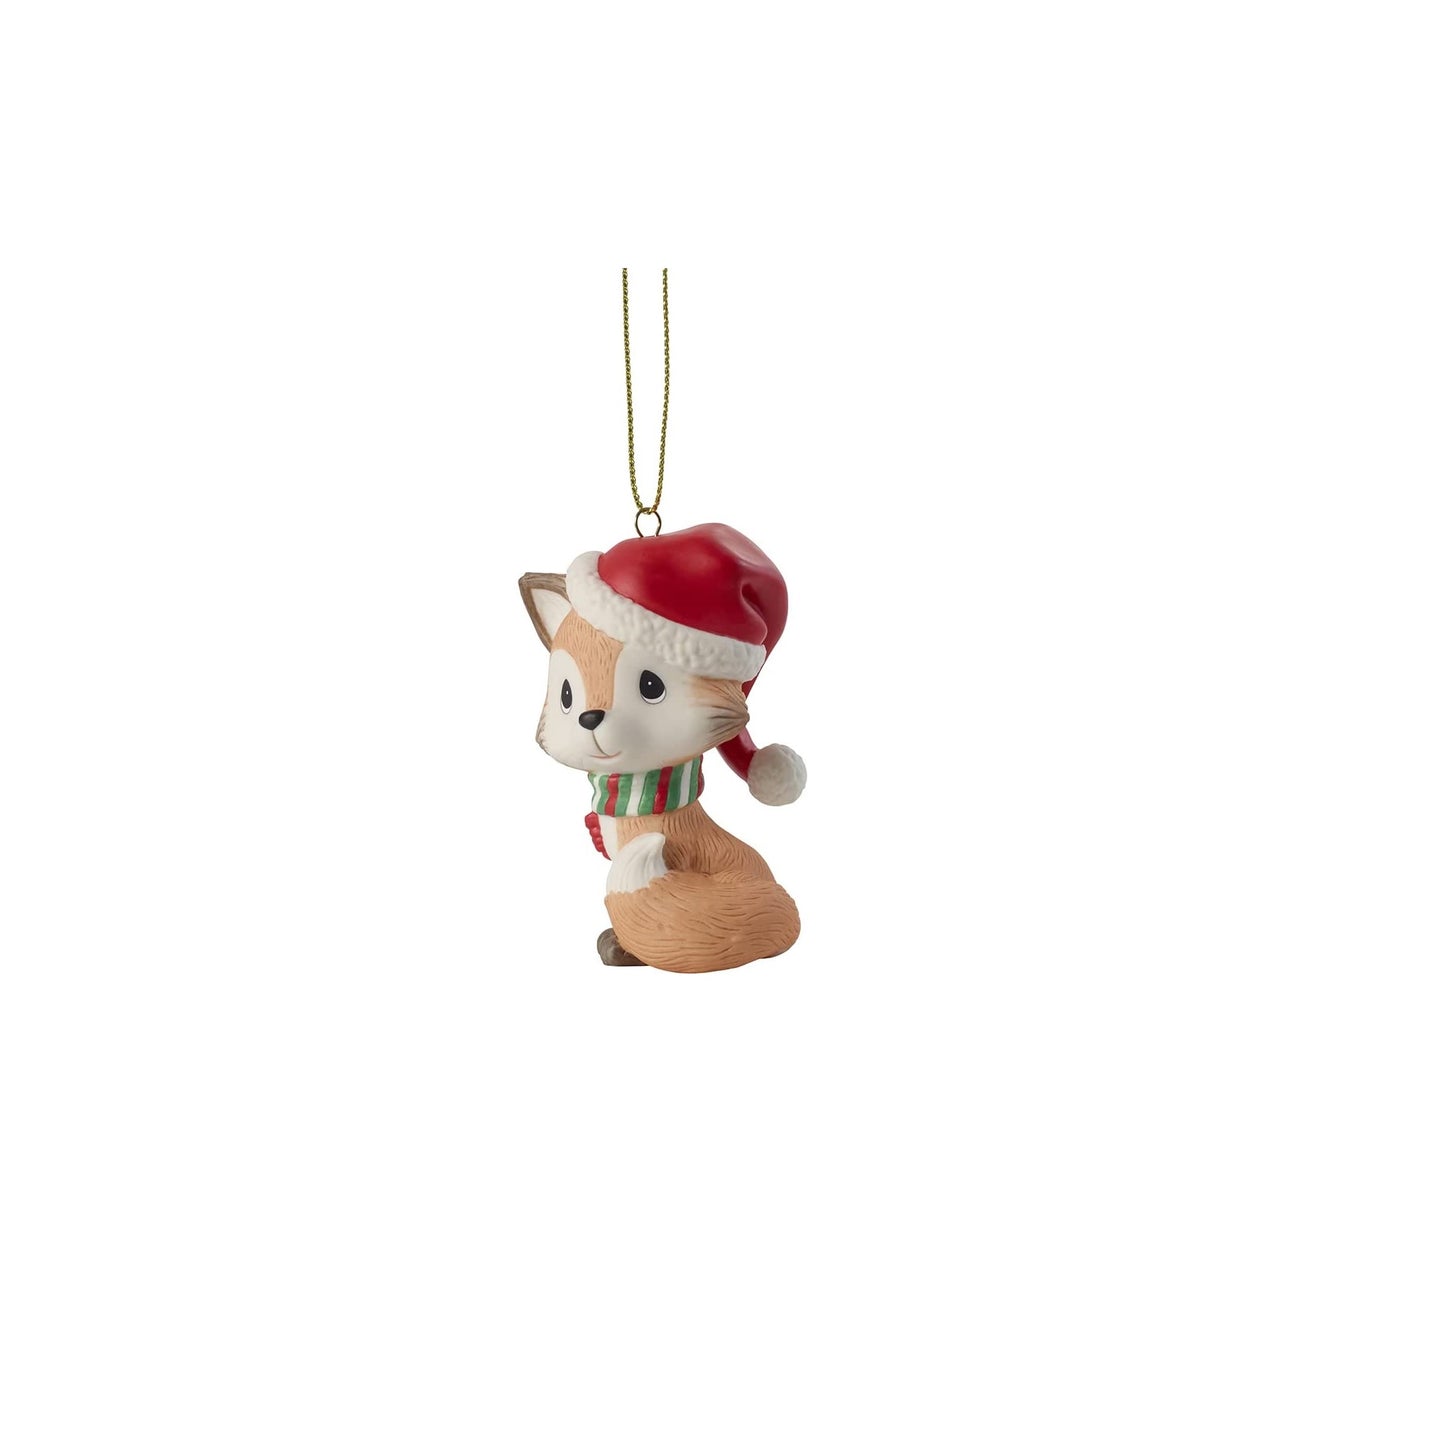 Precious Moments "Cozy Christmas Wishes" Ornament